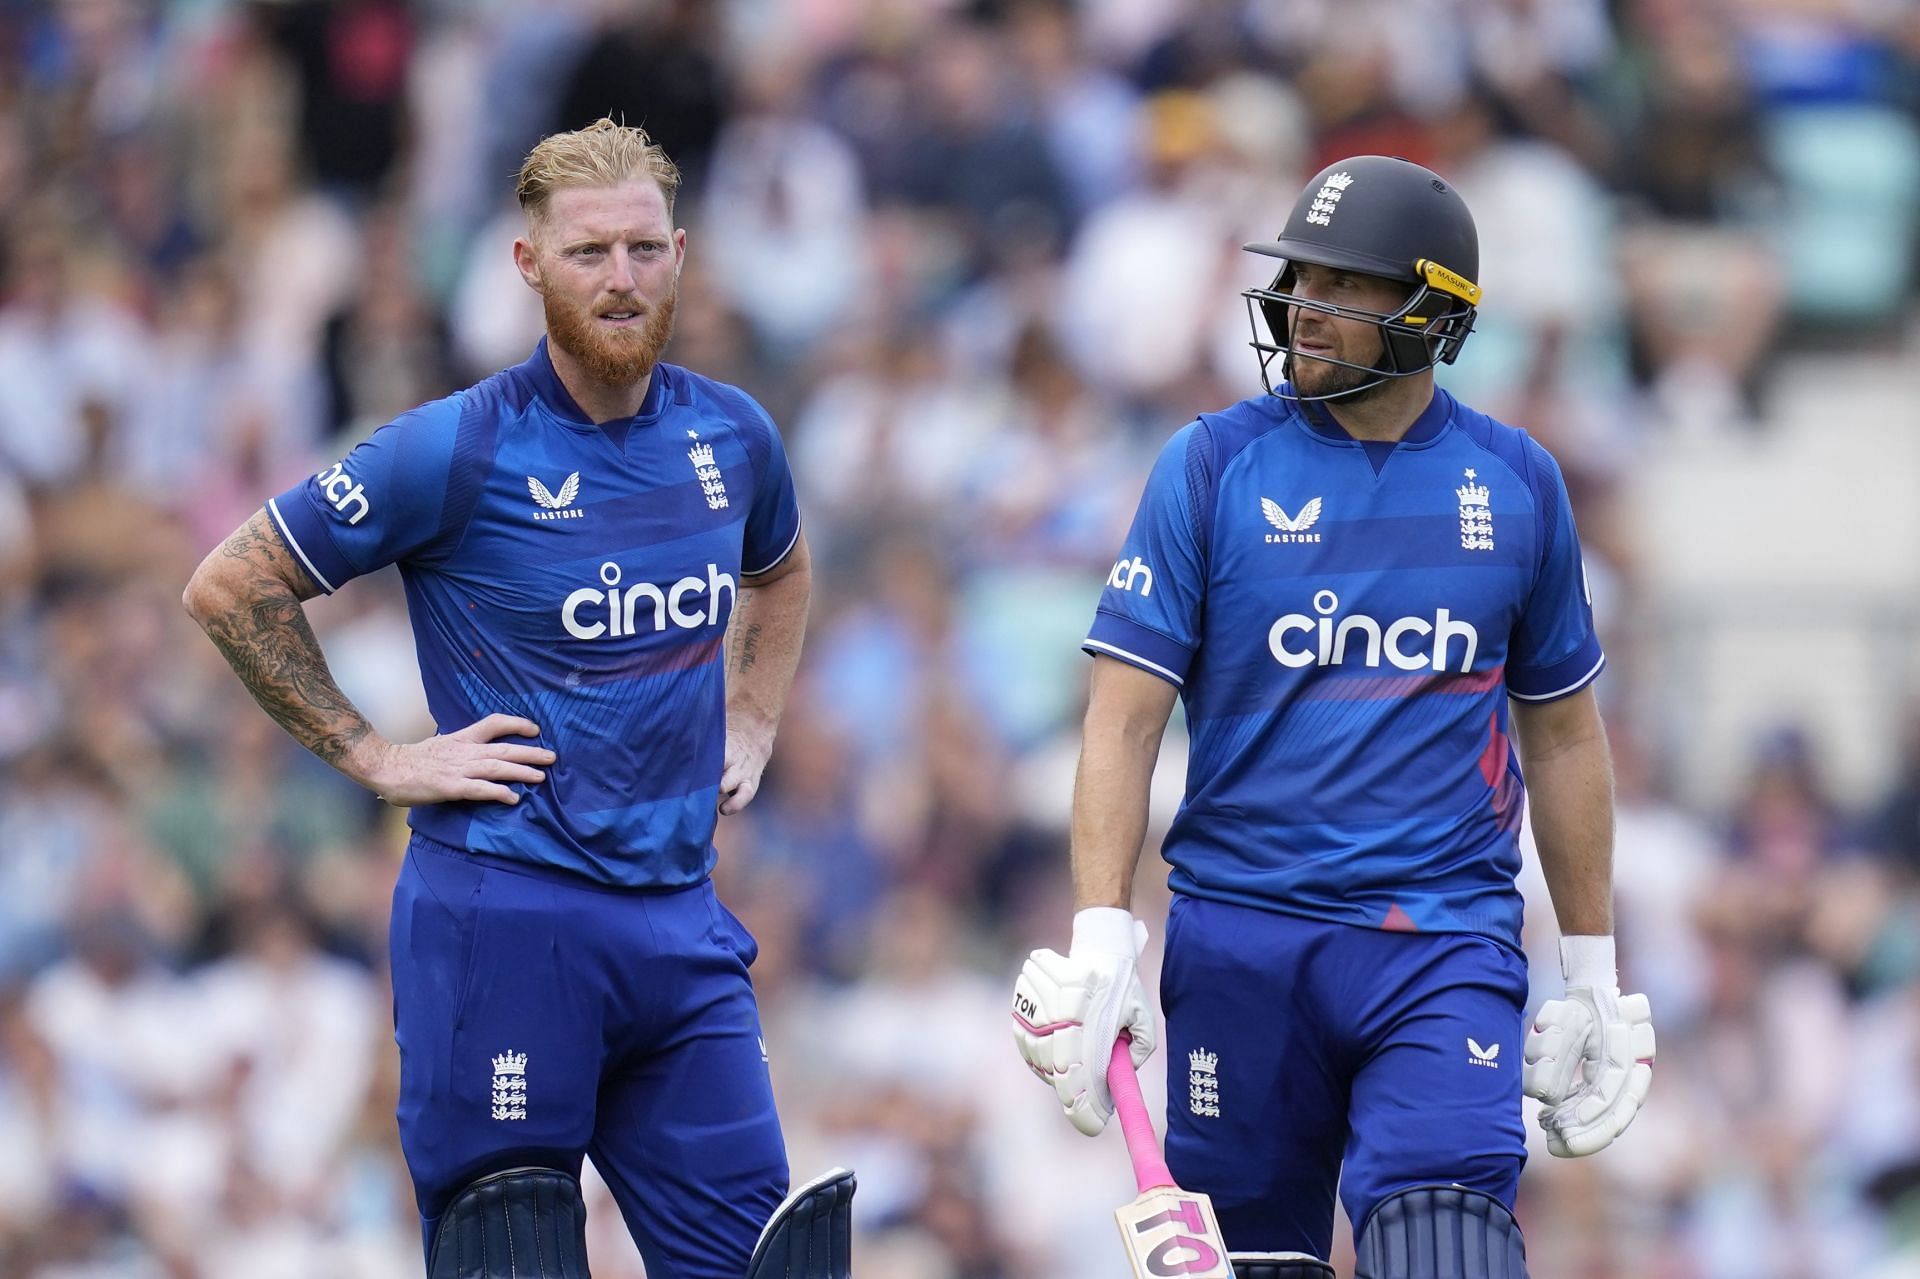 Ben Stokes and Dawid Malan stitched up 199 runs for the third wicket [Getty Images]